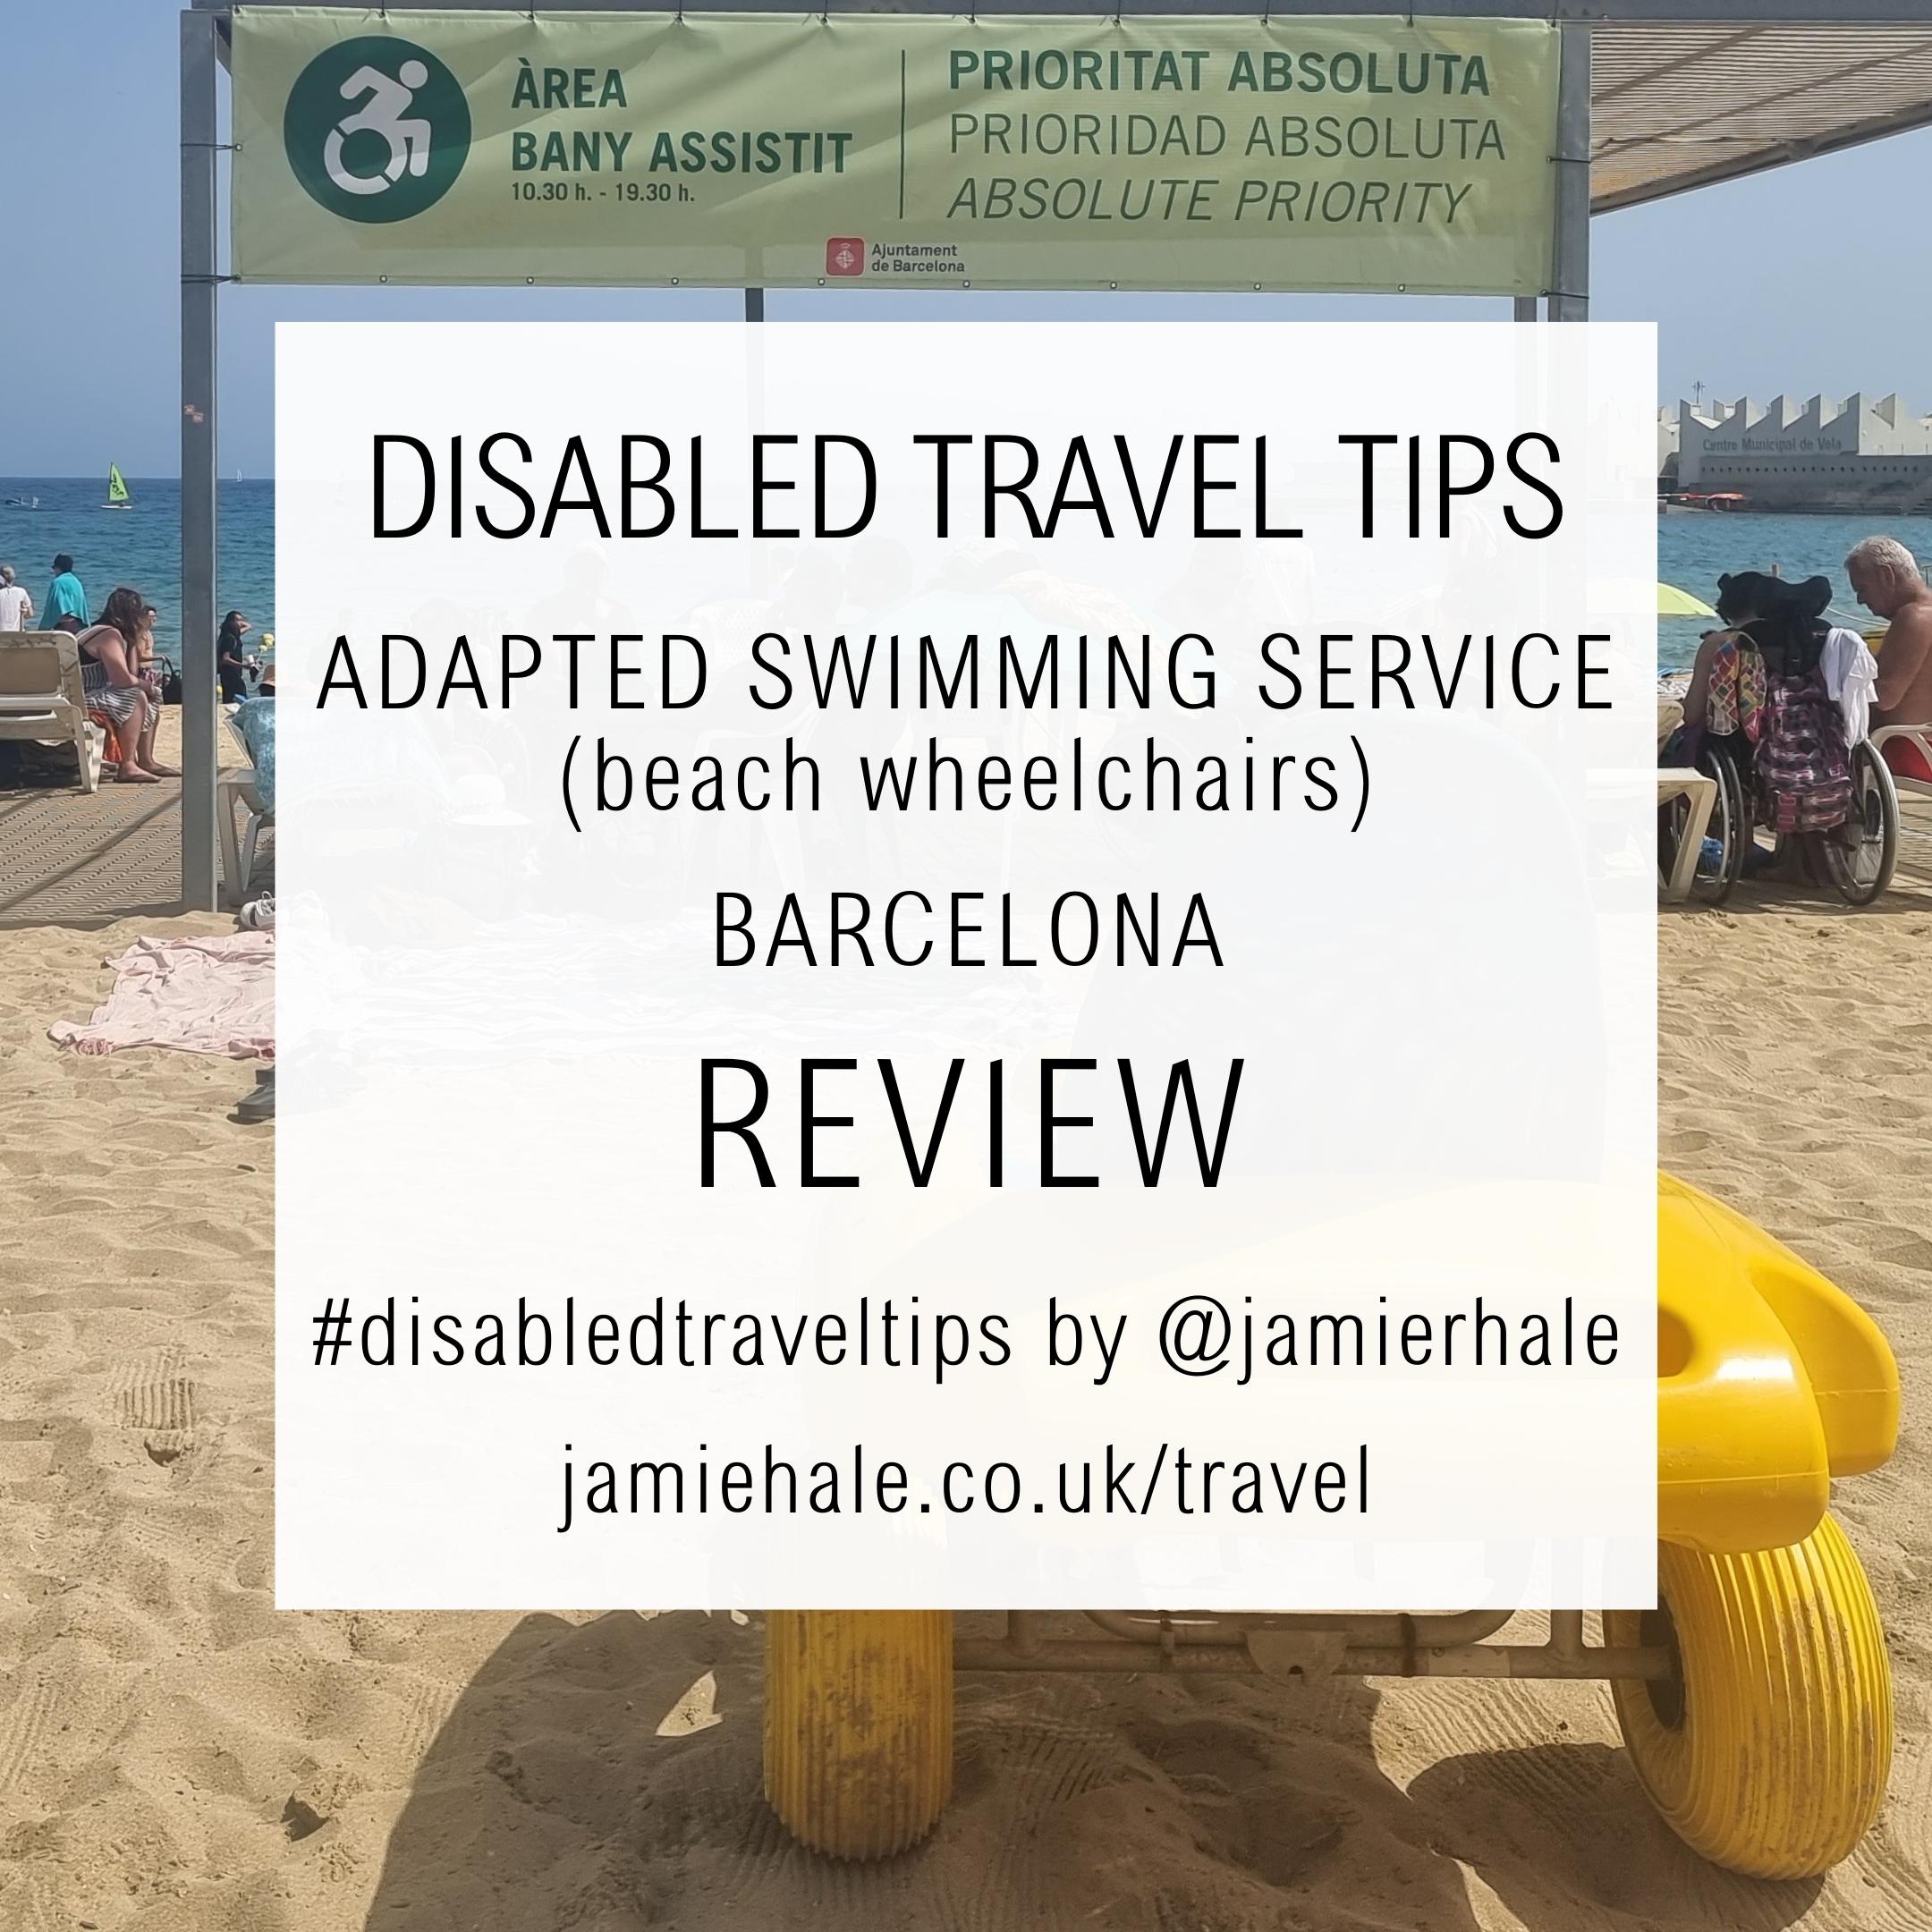 A photo of the sandy beach in Barcelona, with a clear blue sky, lots of beach goers, a sign reading 'ABSOLUTE PRIORITY' next to a wheelchair user symbol, and a beach wheelchair. Over the photo is a text box reading 'Disabled Travel Tips', 'Adapted swimming service (beach wheelchairs)', 'Barcelona', 'Review', '#disabledtraveltips by @jamierhale jamiehale.co.uk/travel'